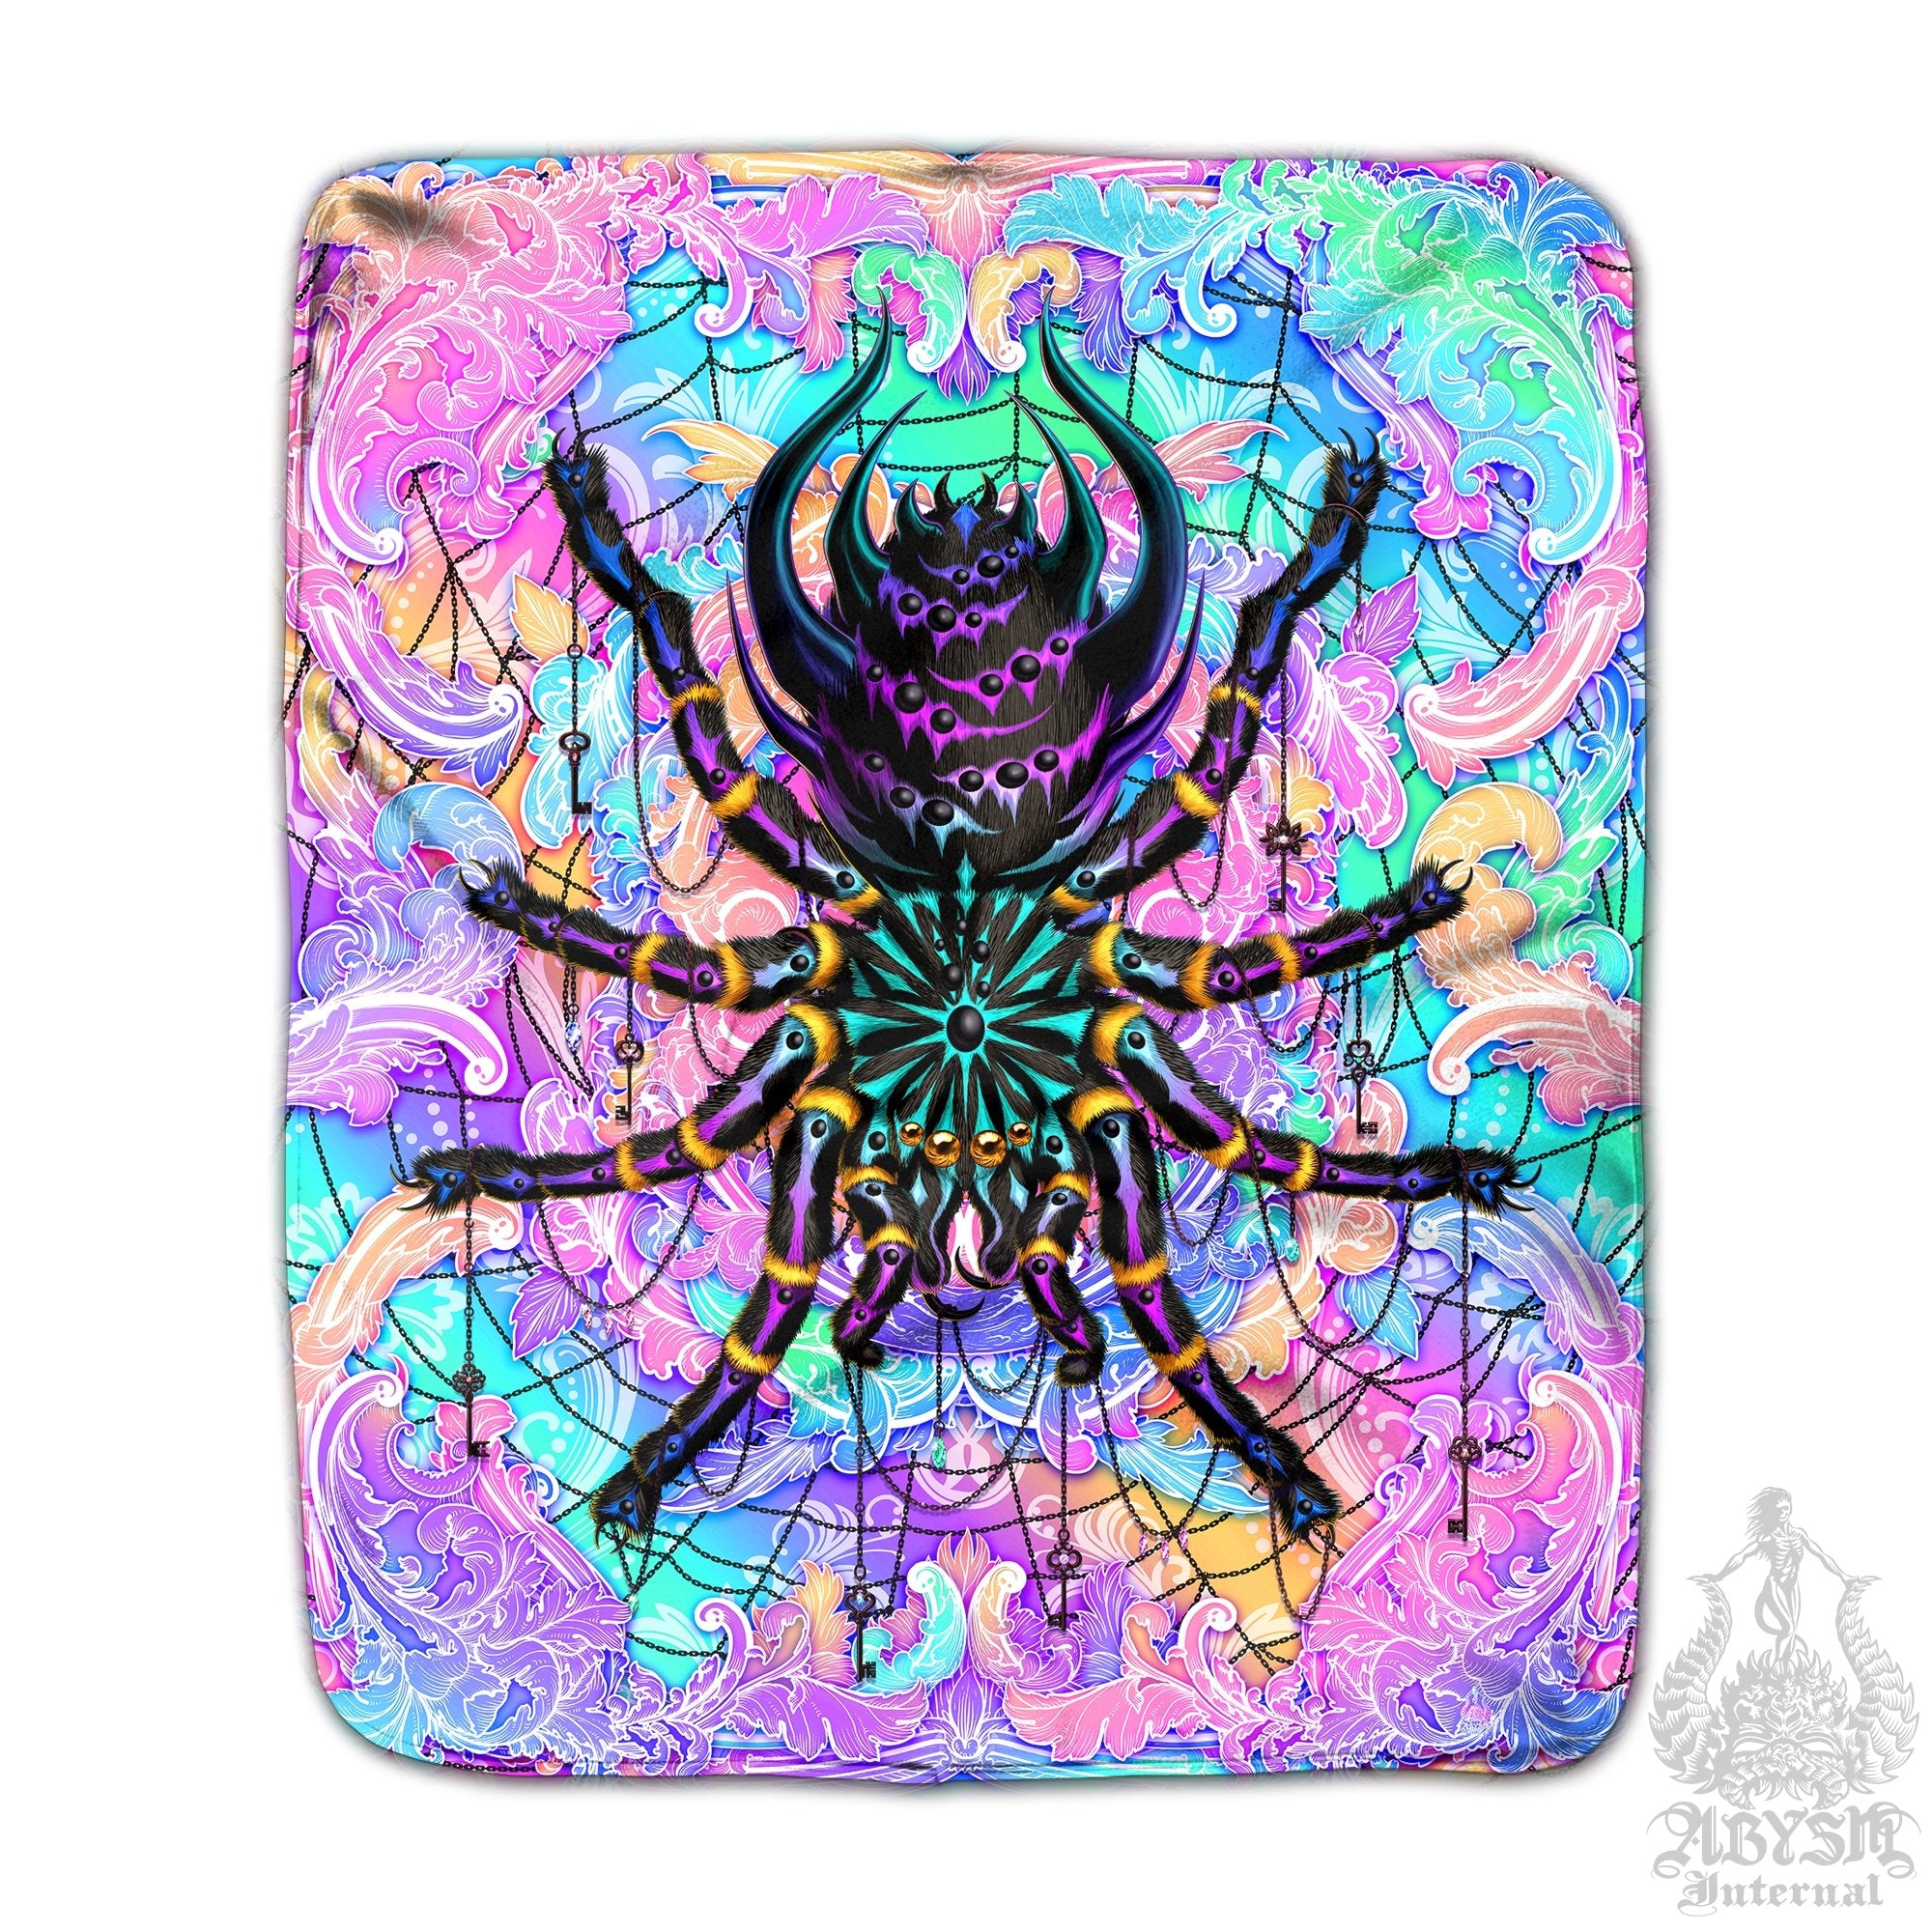 Psychedelic Throw Fleece Blanket, Aesthetic Home Decor, Holographic Gift, Eclectic and Funky Gift - Spider, Pastel Punk Black, Tarantula Art - Abysm Internal